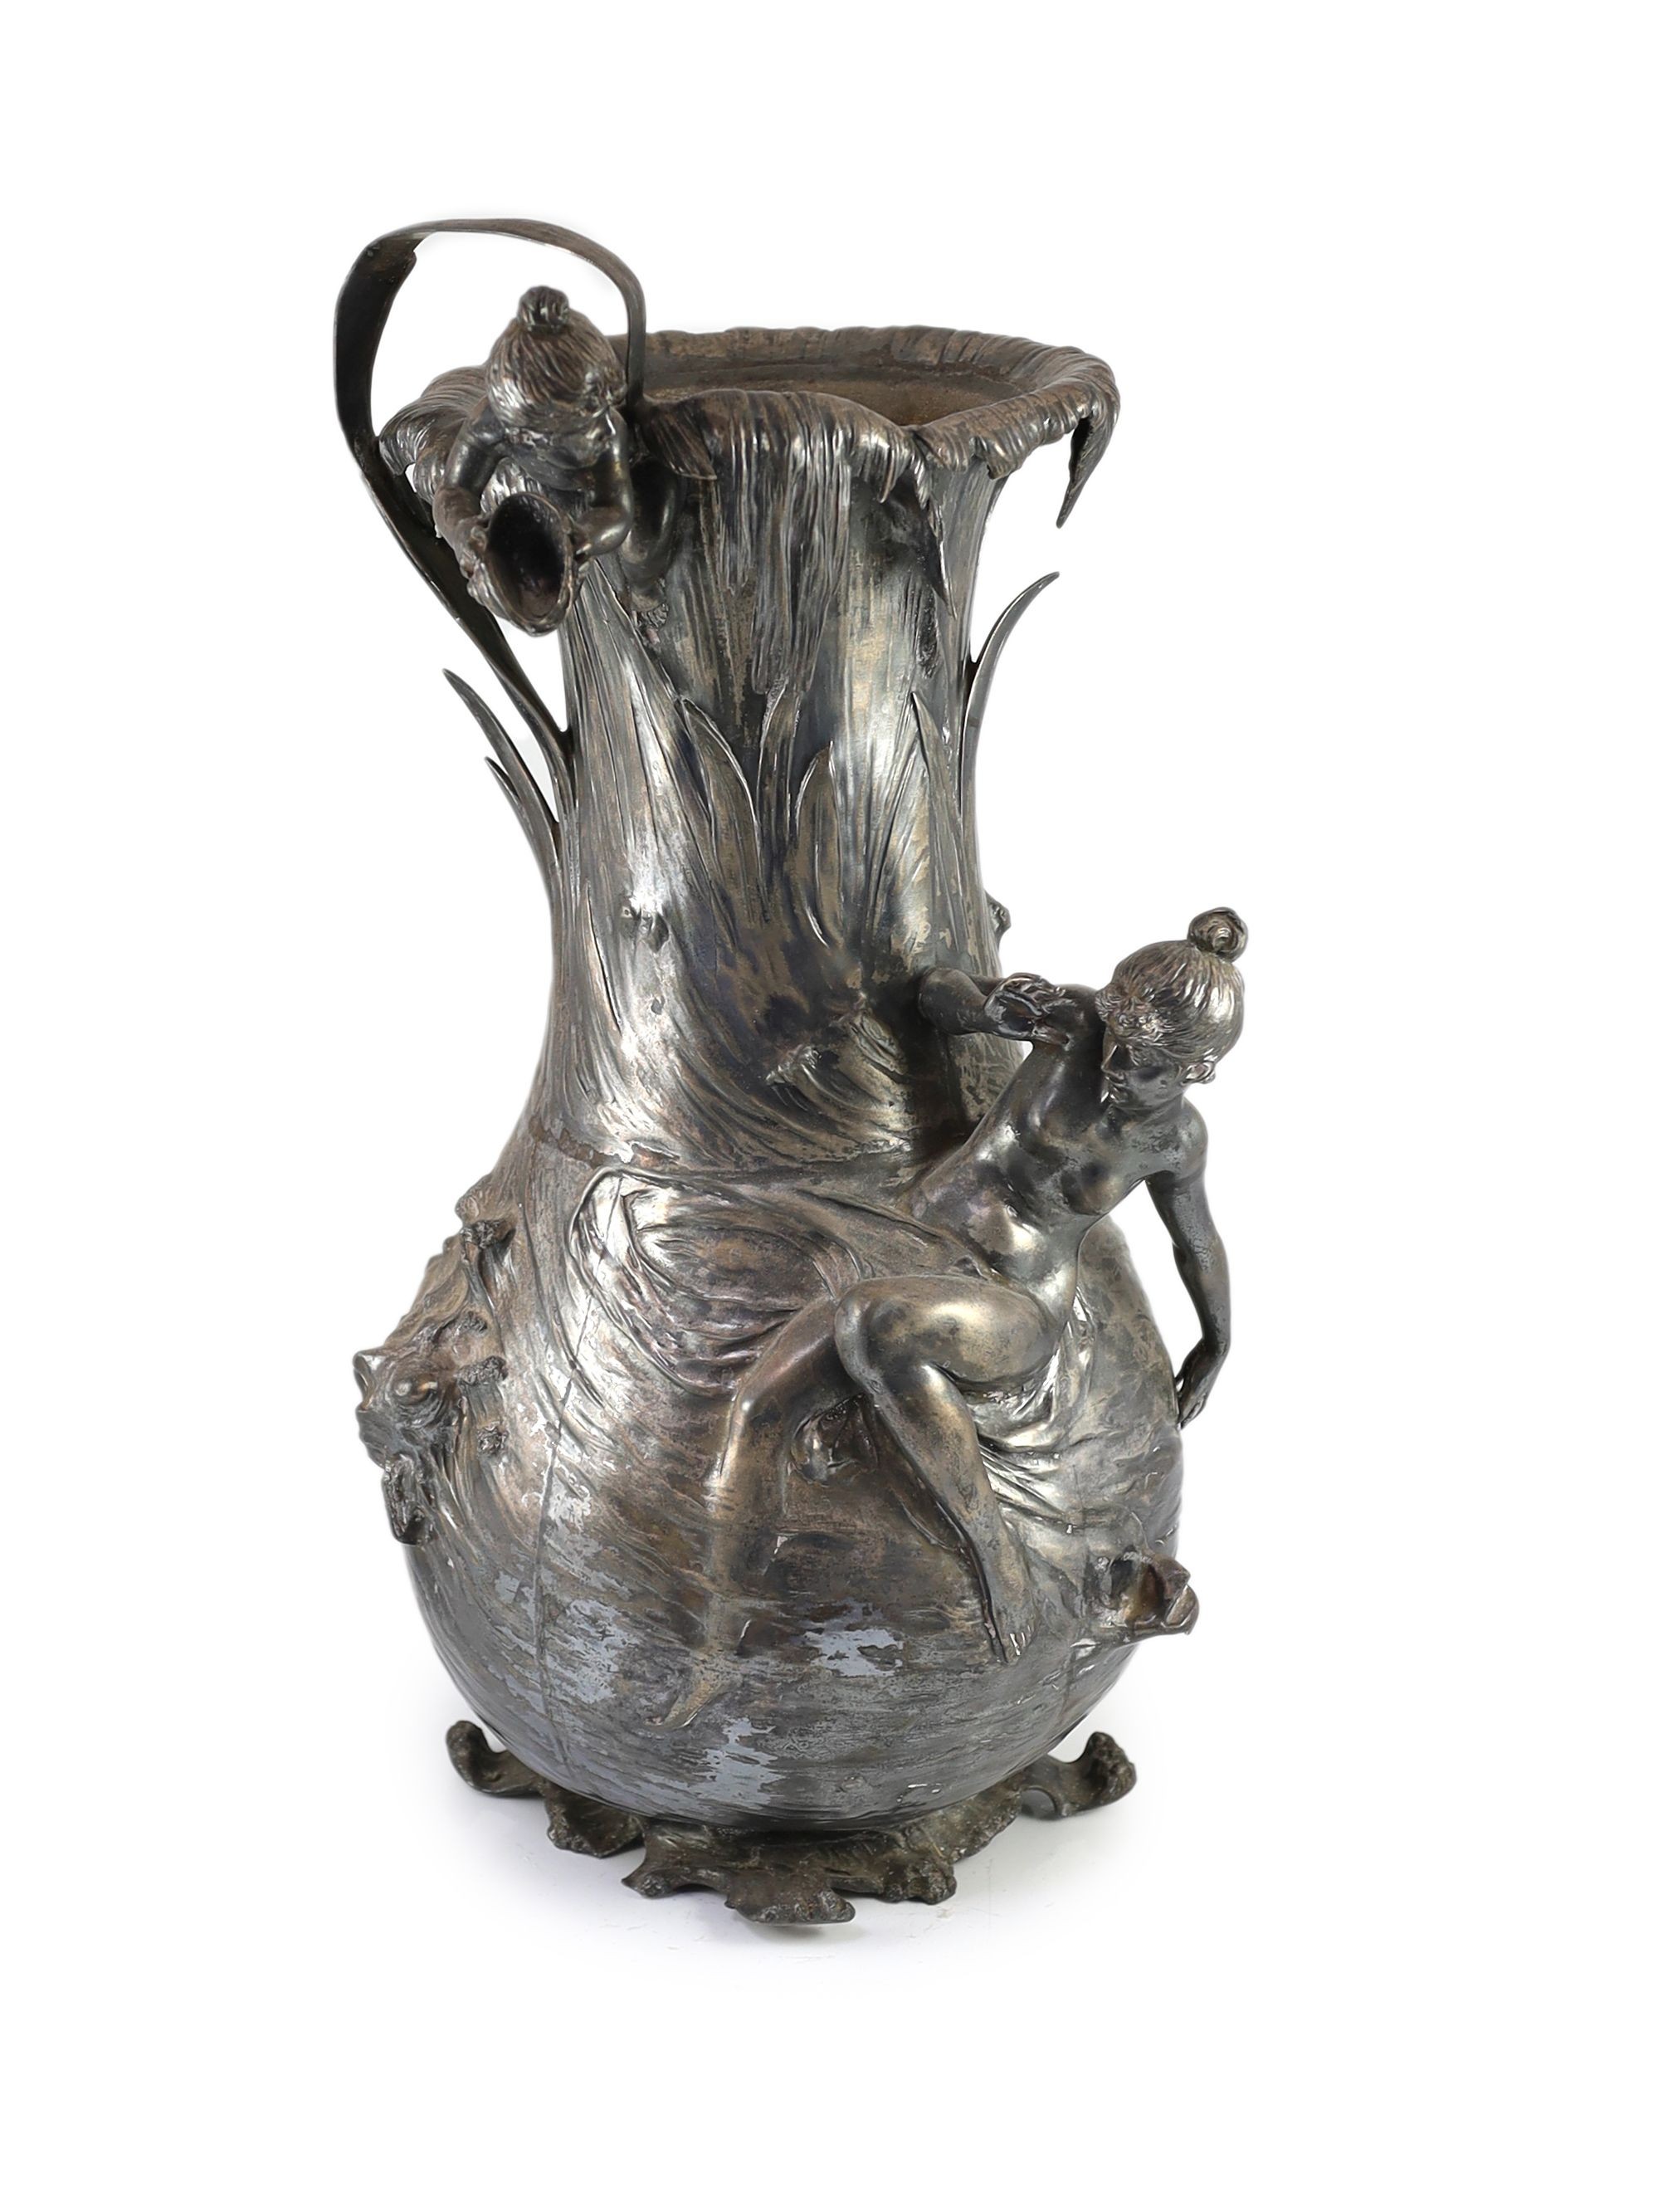 An unusually large WMF Art Nouveau silvered pewter vase,modelled as a water nymph and child